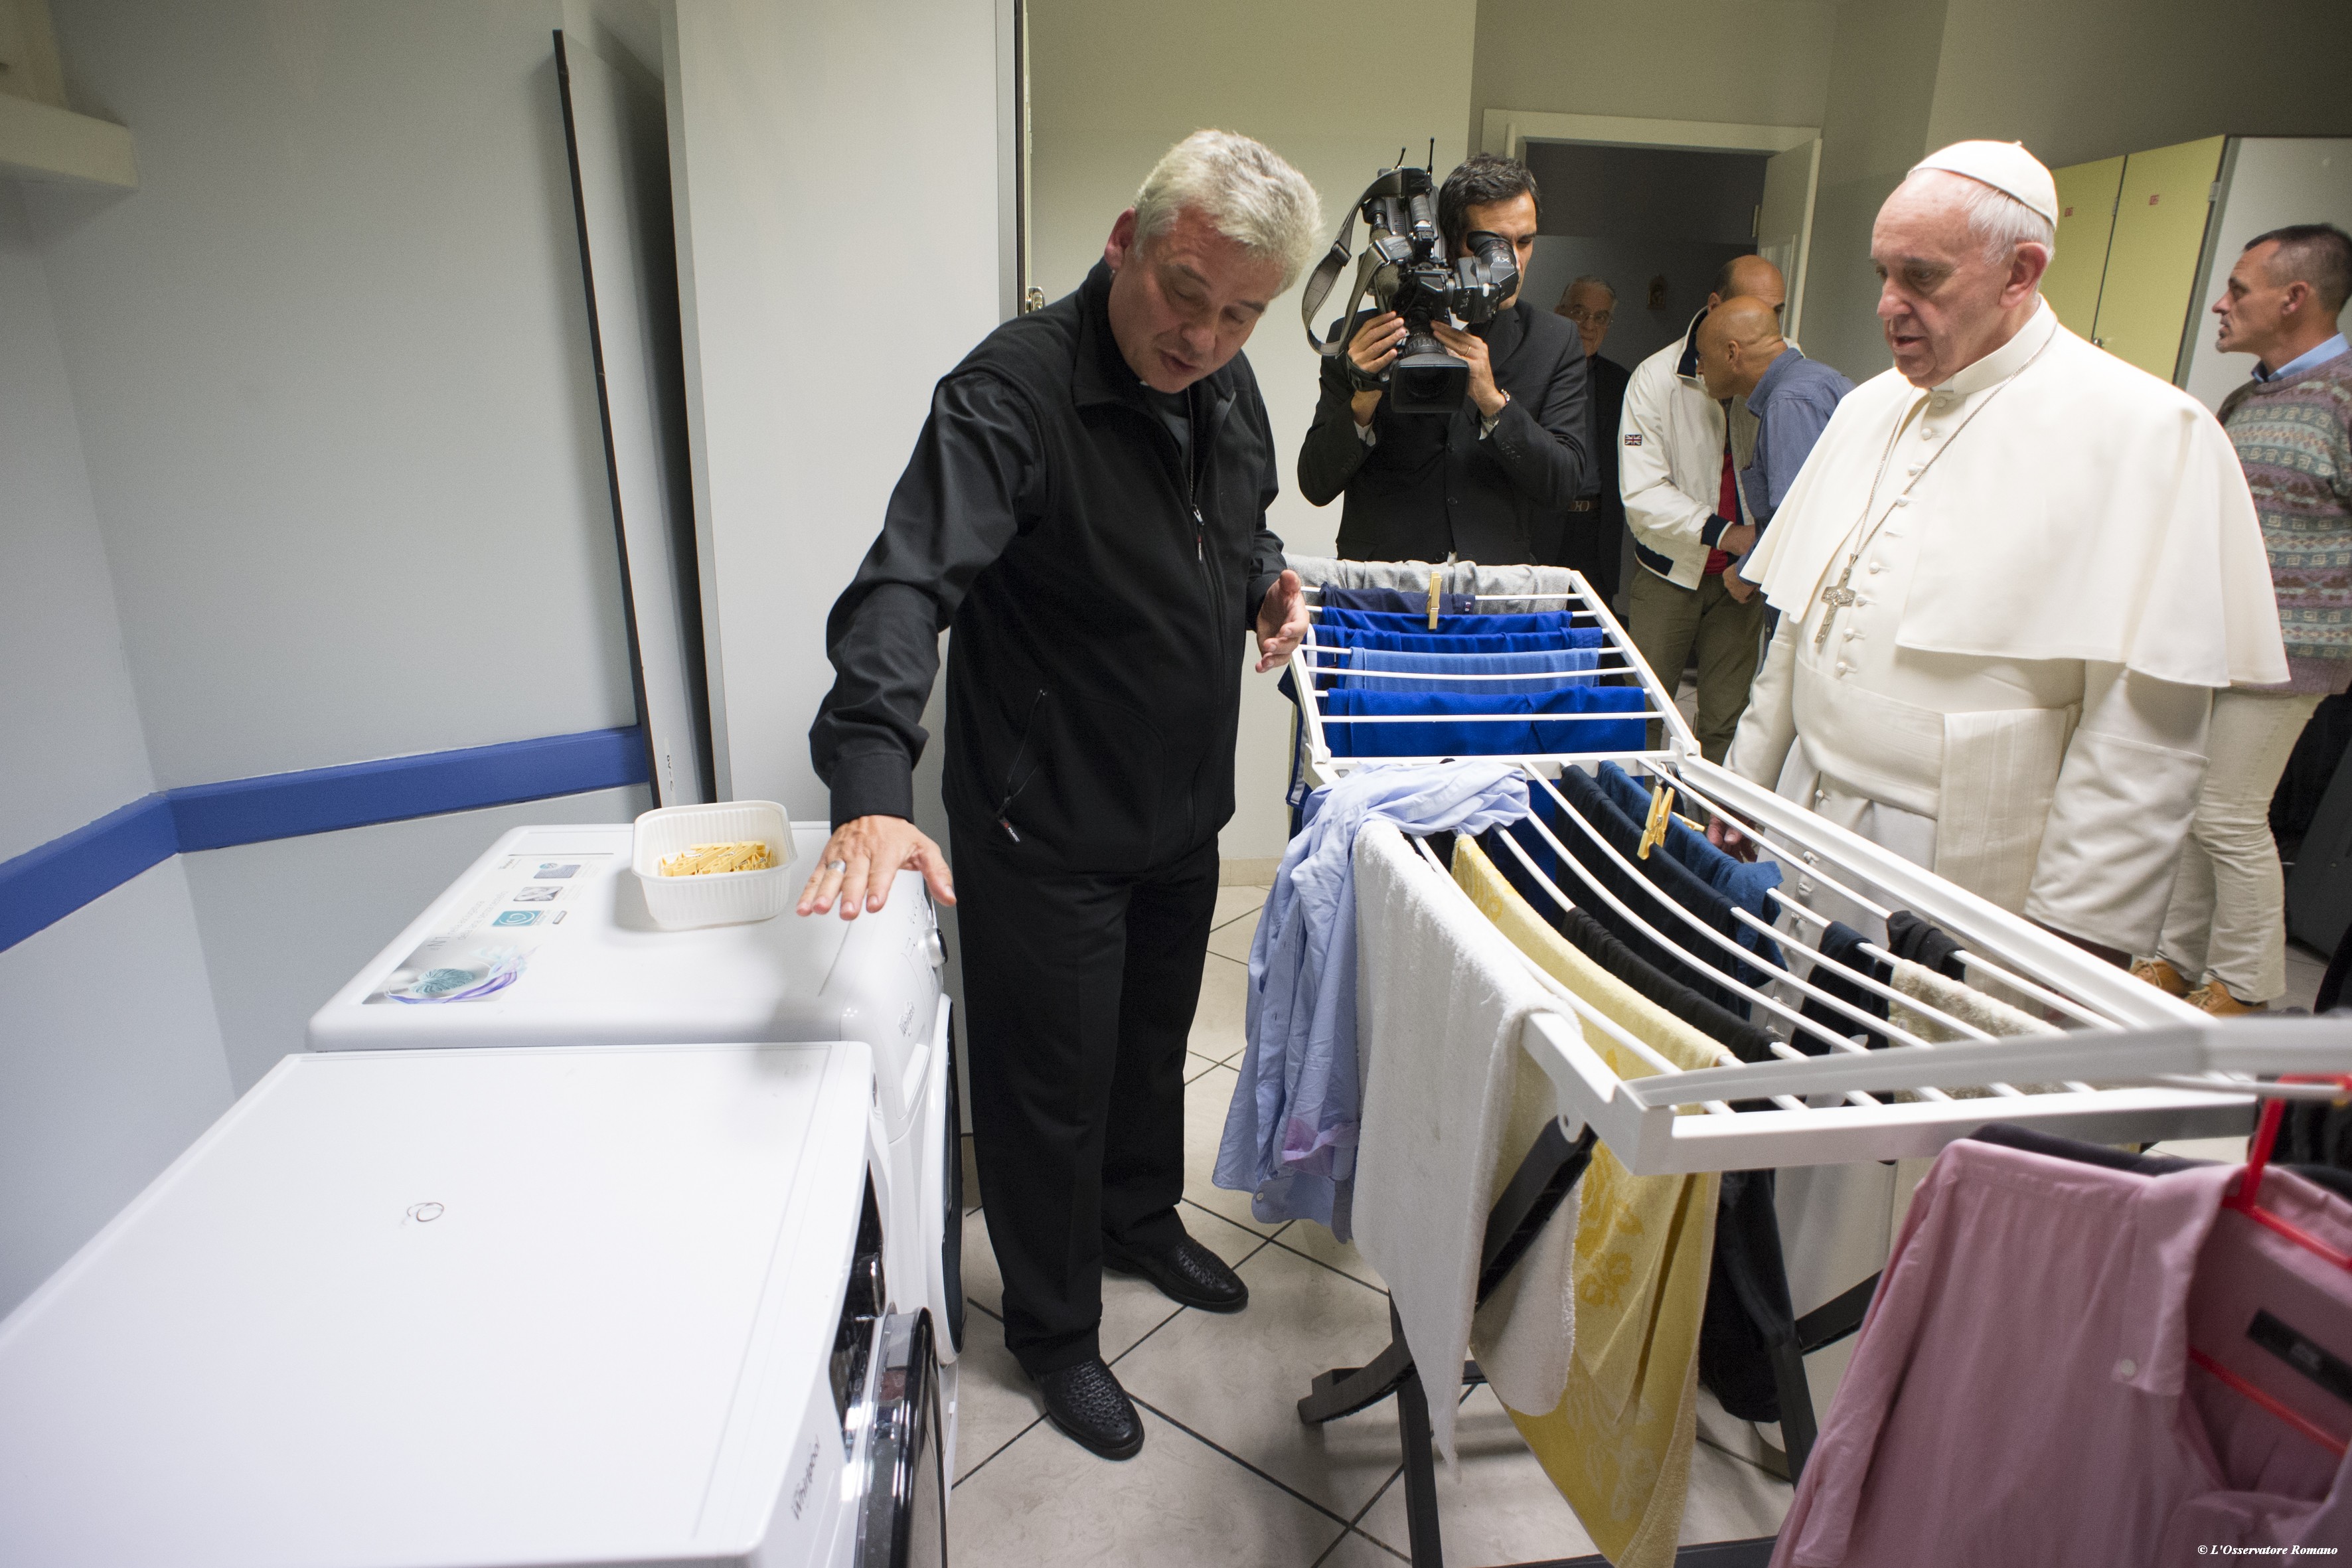 Pope Francis' visit at the new dormitory for the homeless on Thursday evening